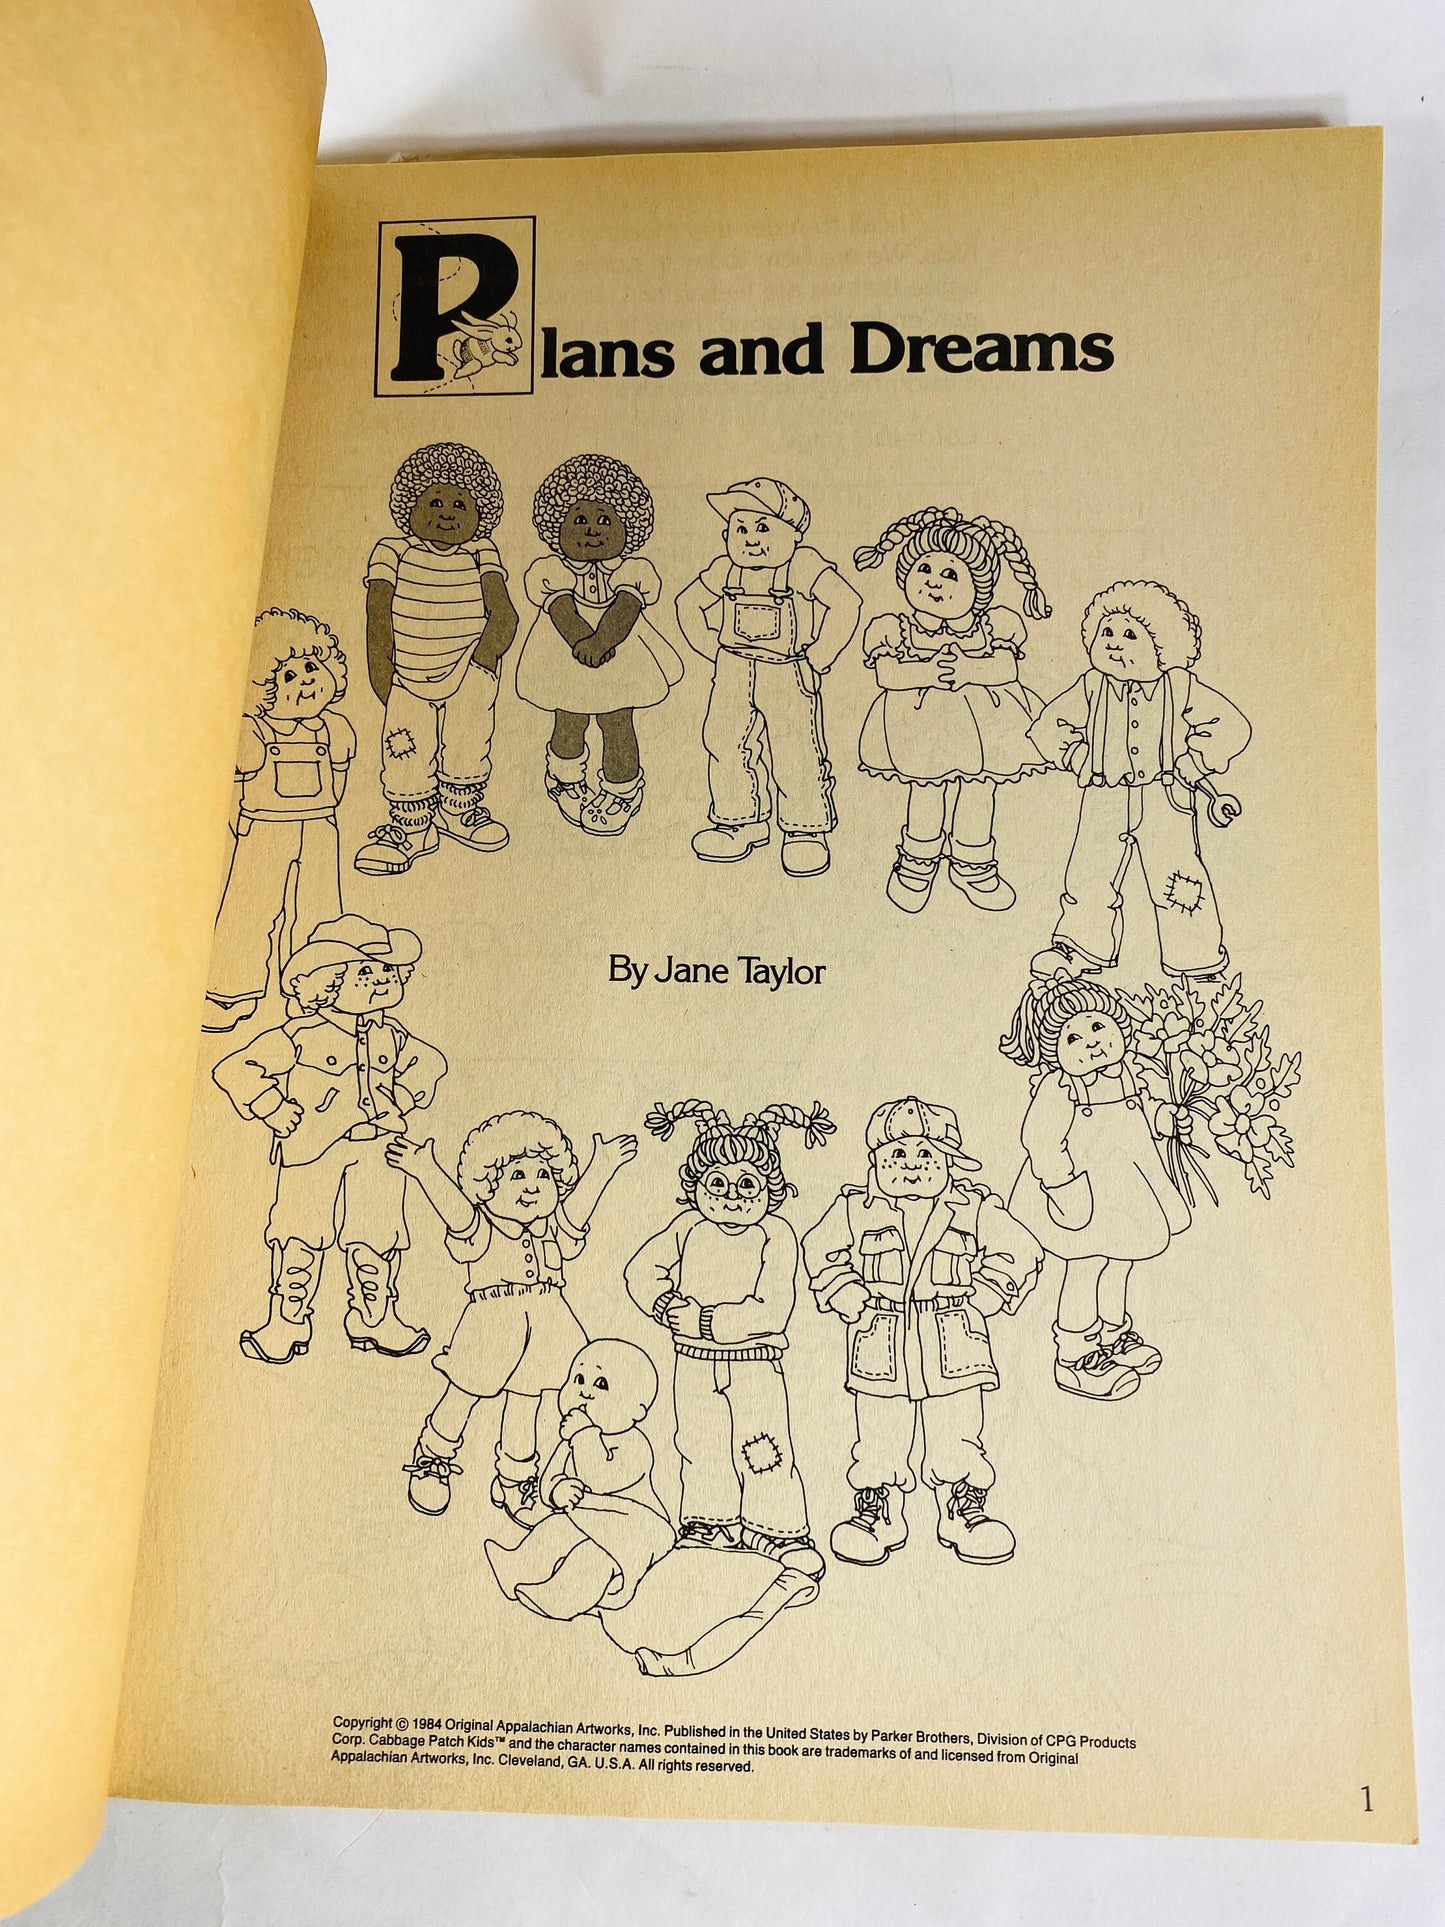 1983 Cabbage Patch Kids Coloring Book Vintage activity book for children from the 1980s with some pages colored. Parker Brothers